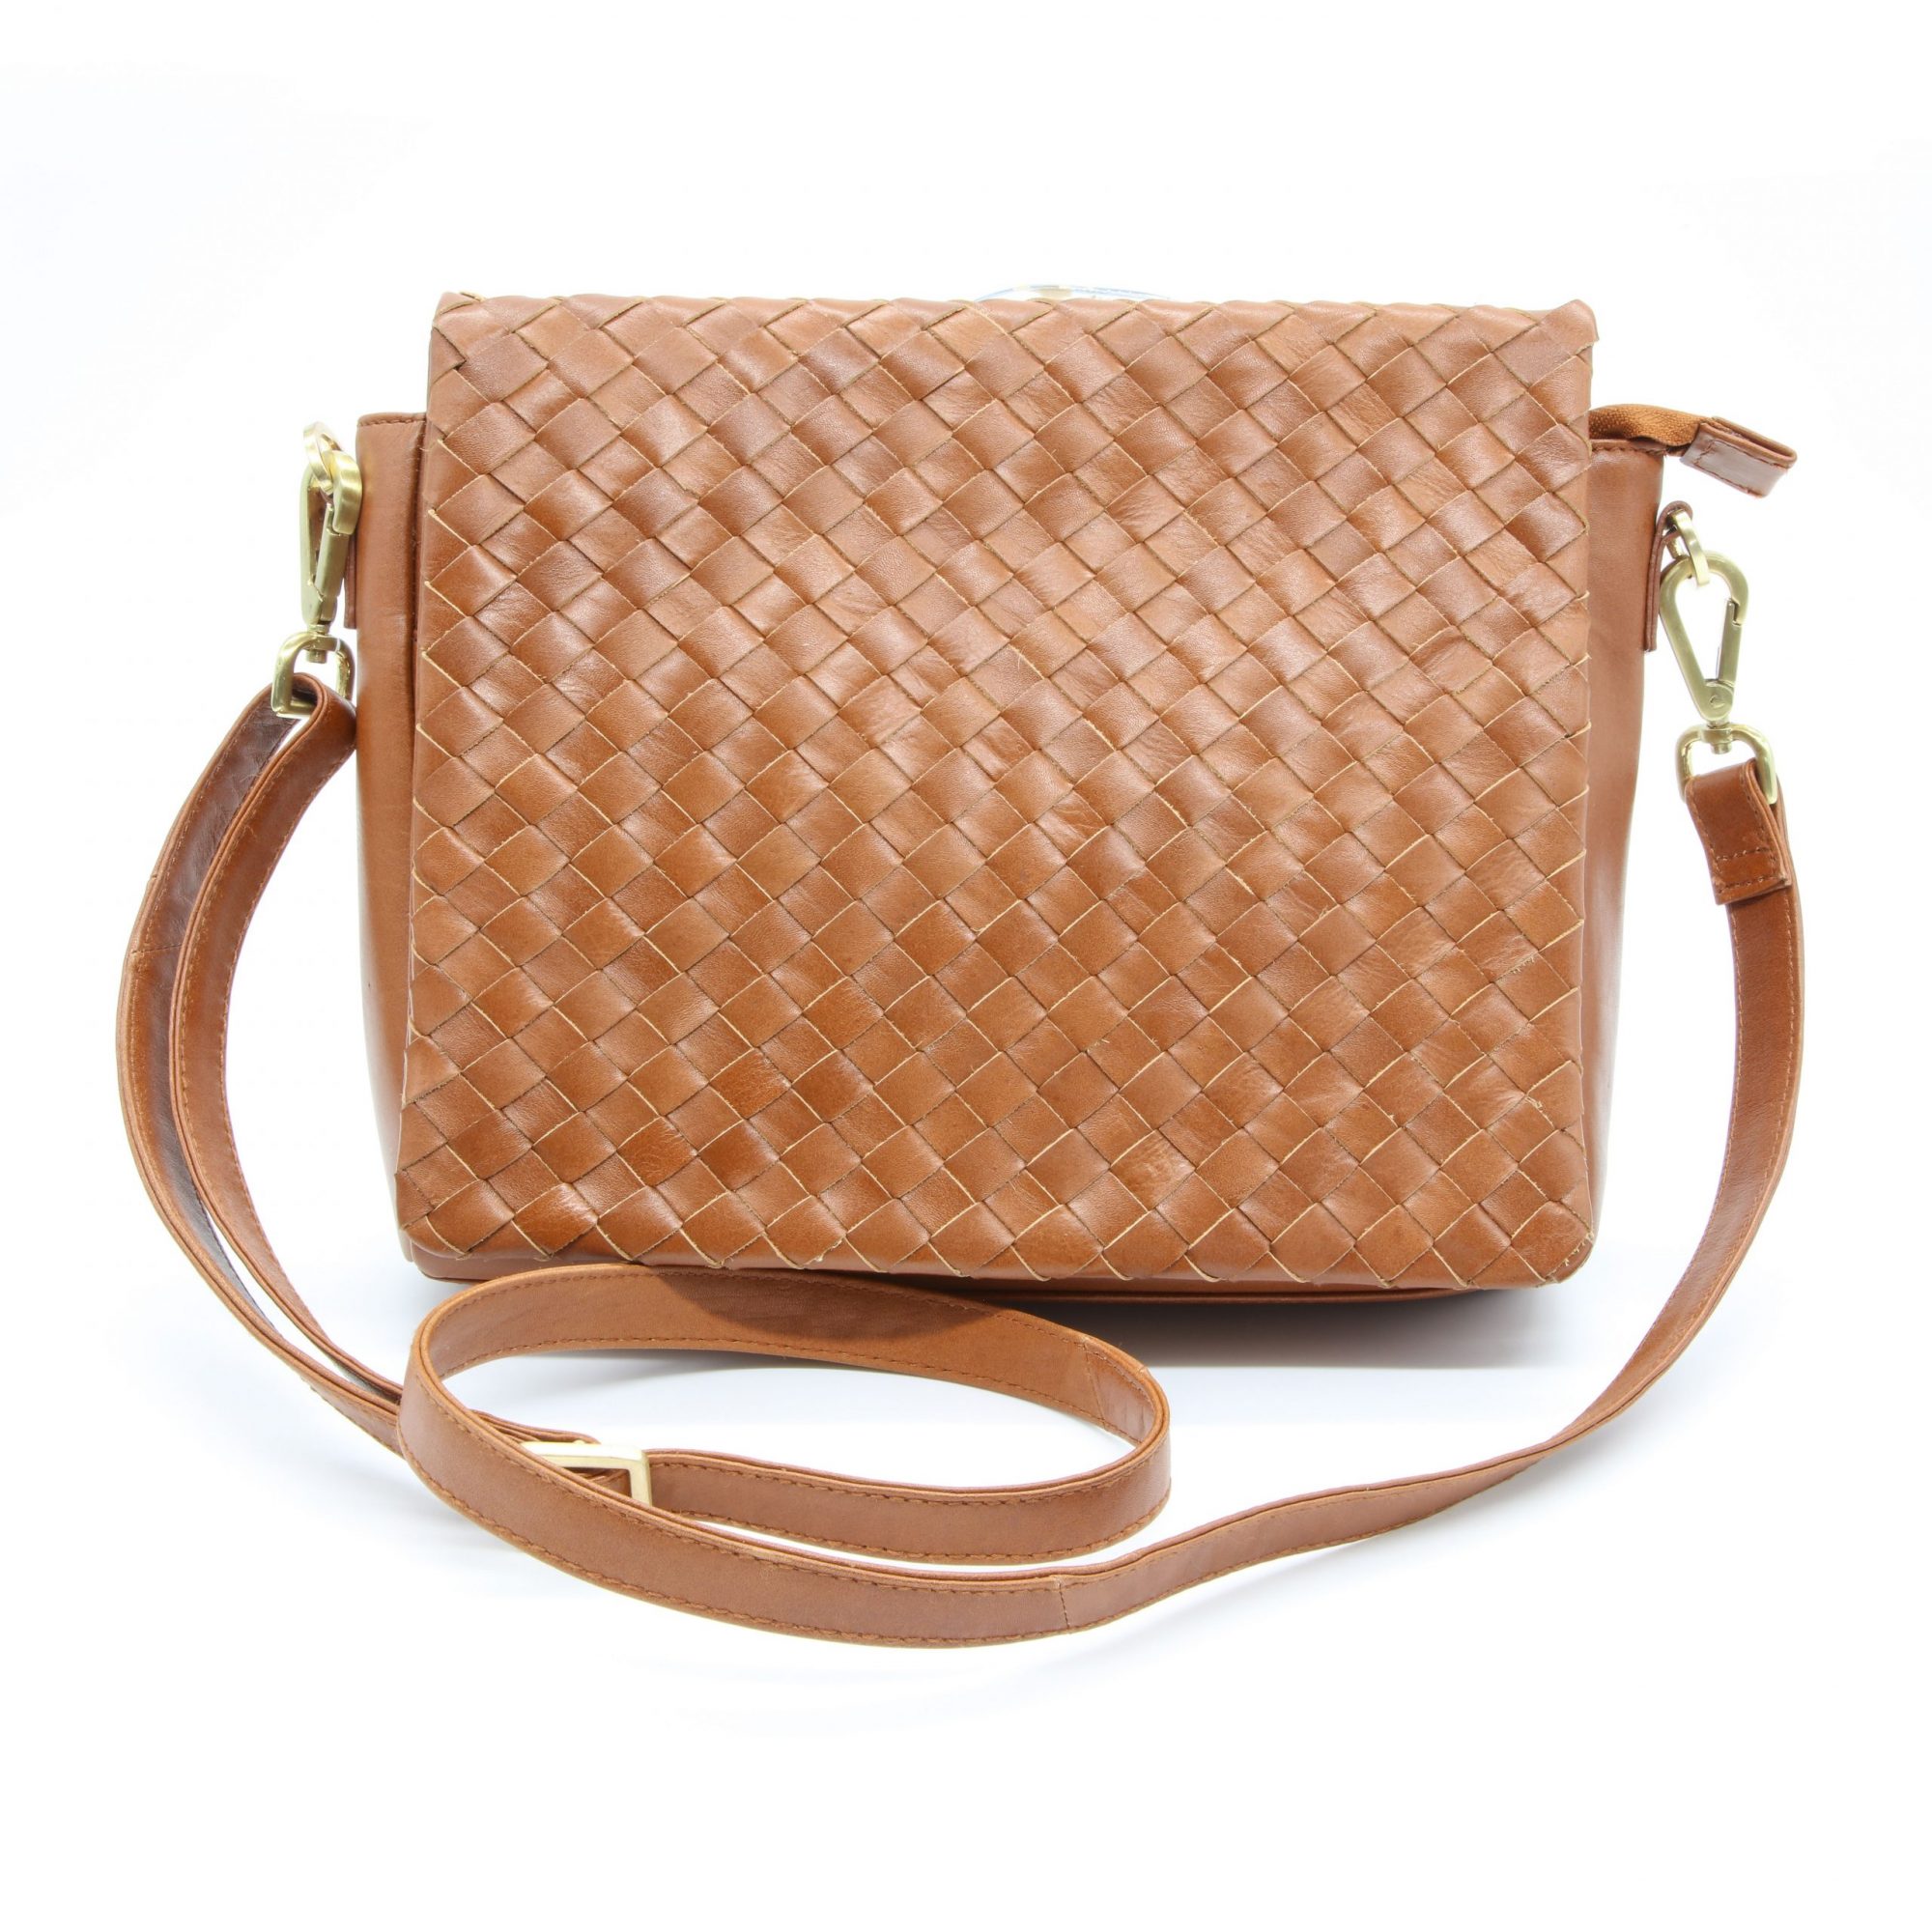 Lappella luxury soft leather Layla organiser bag in tan weave leather. Front shot.